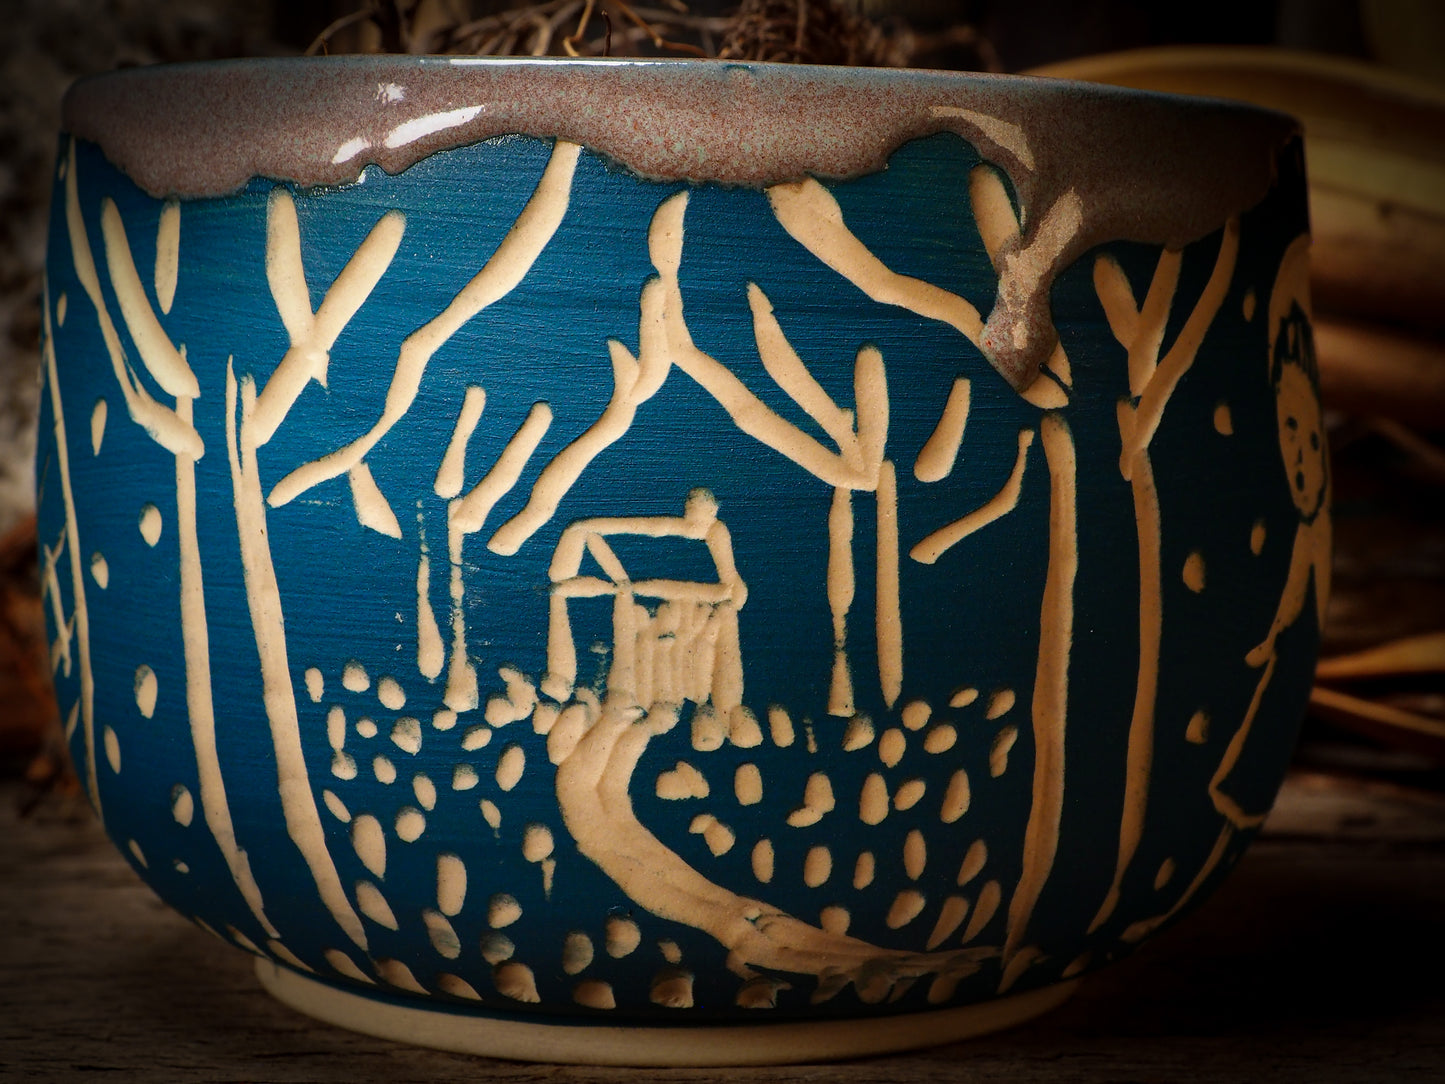 You are looking at original handmade fire glazed stoneware ceramic piece with sgraffito bird and peasant girl motifs in a deep aquamarine color by Idania Salcido, the artist behind Danita Art.  Each original Danita Art ceramics piece is unique and special and cannot be repeated. You are getting a one of a kind work of art to display, or use it as one of your favorite home decorations.